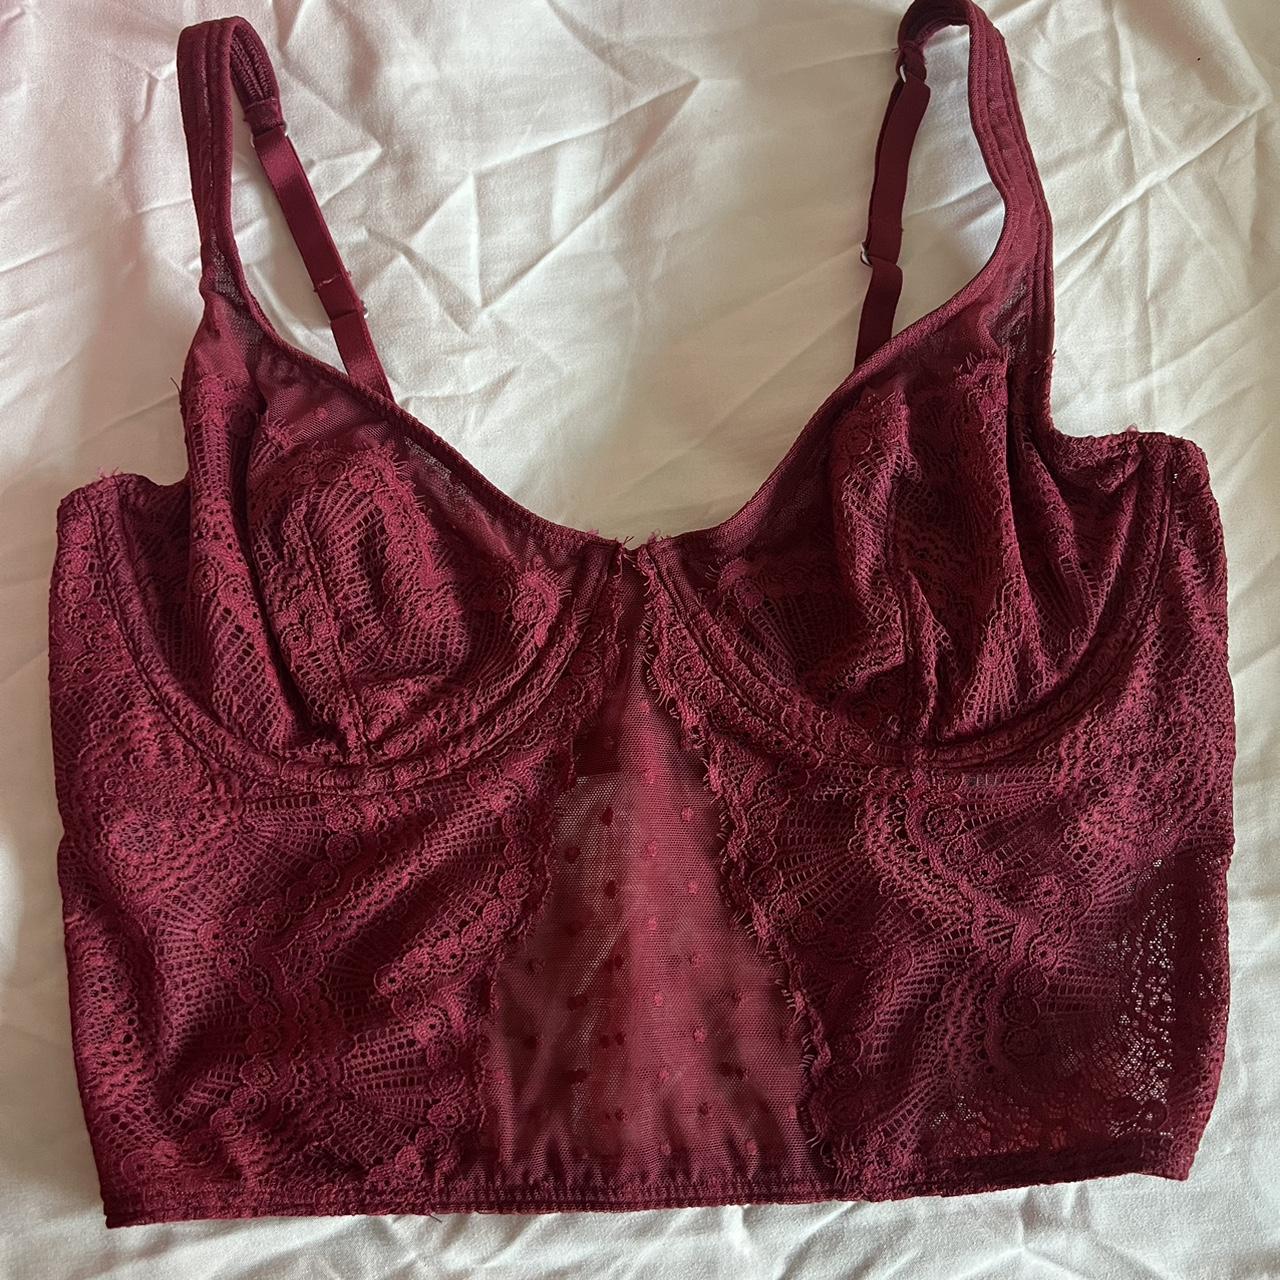 Gilly Hicks Bralette Red - $8 (46% Off Retail) - From Desiree